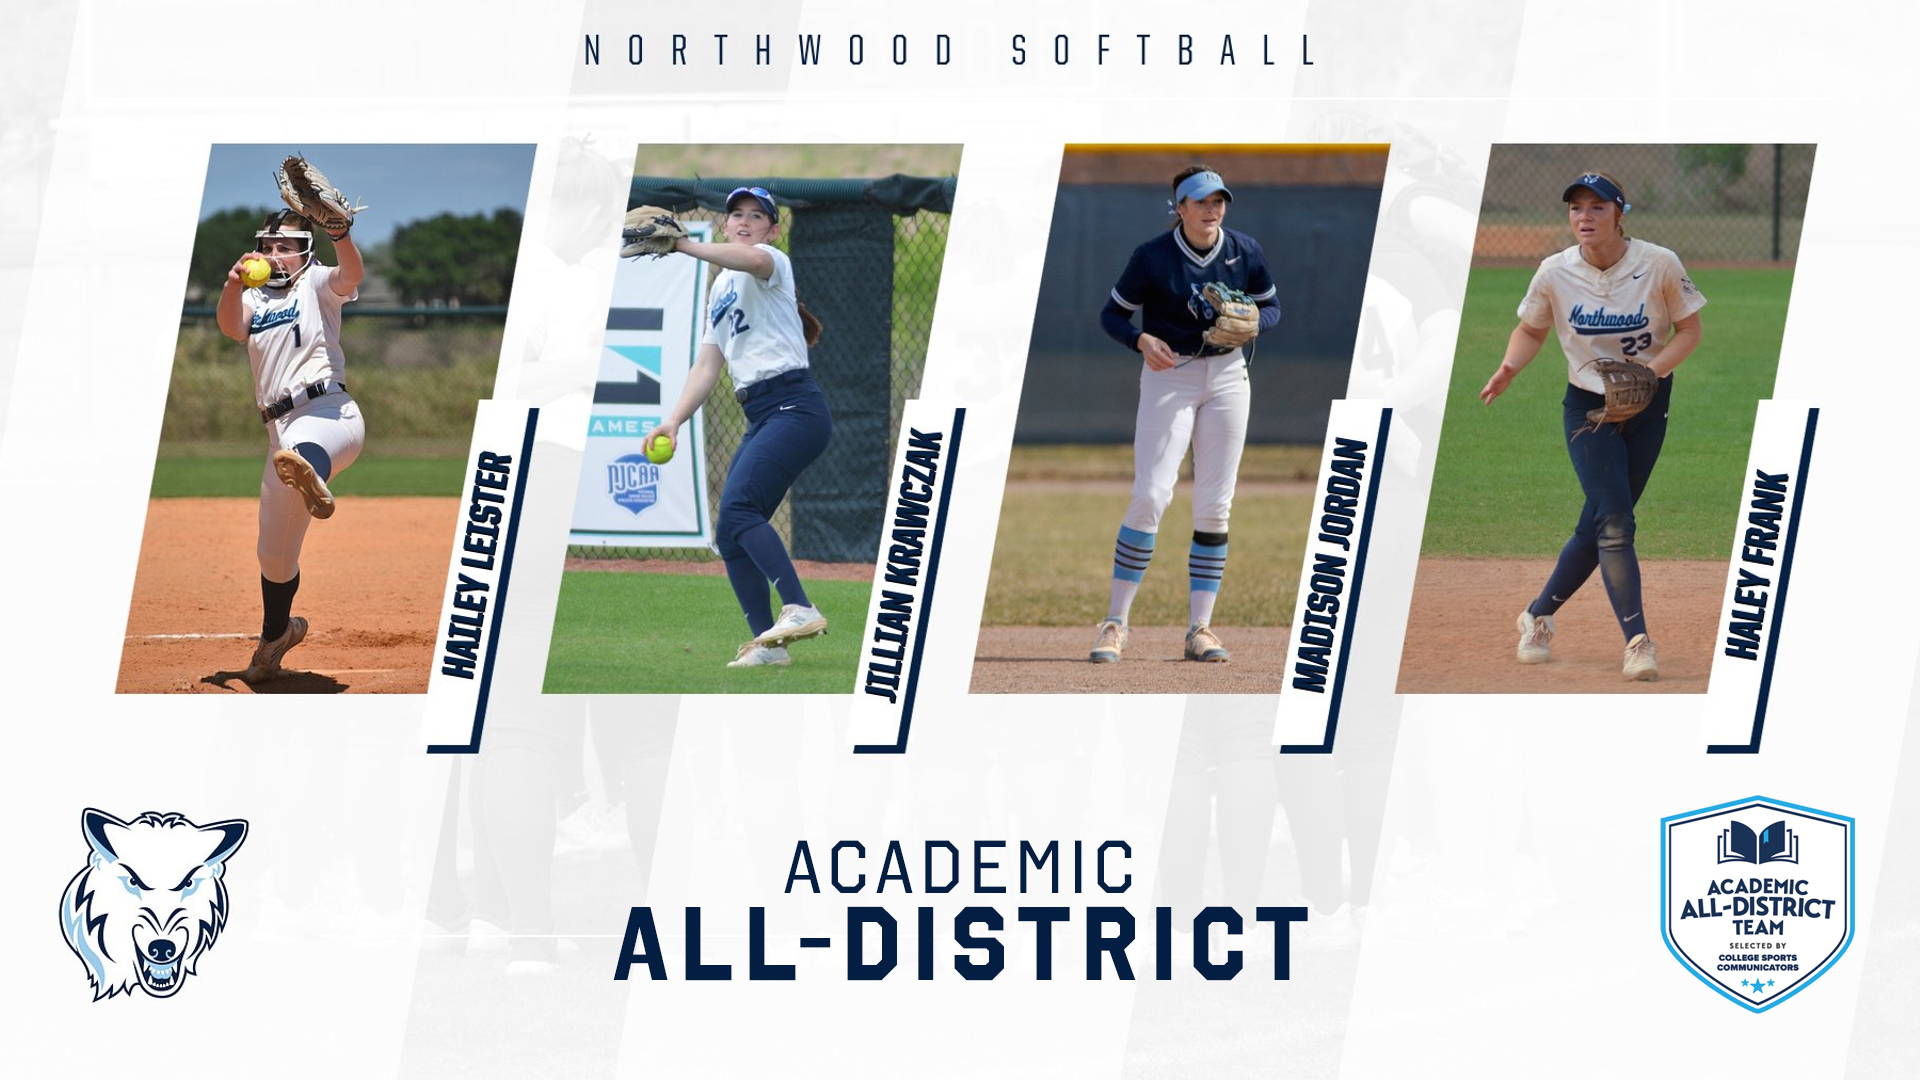 Four Timberwolves Earn Academic All-District Honors For Softball